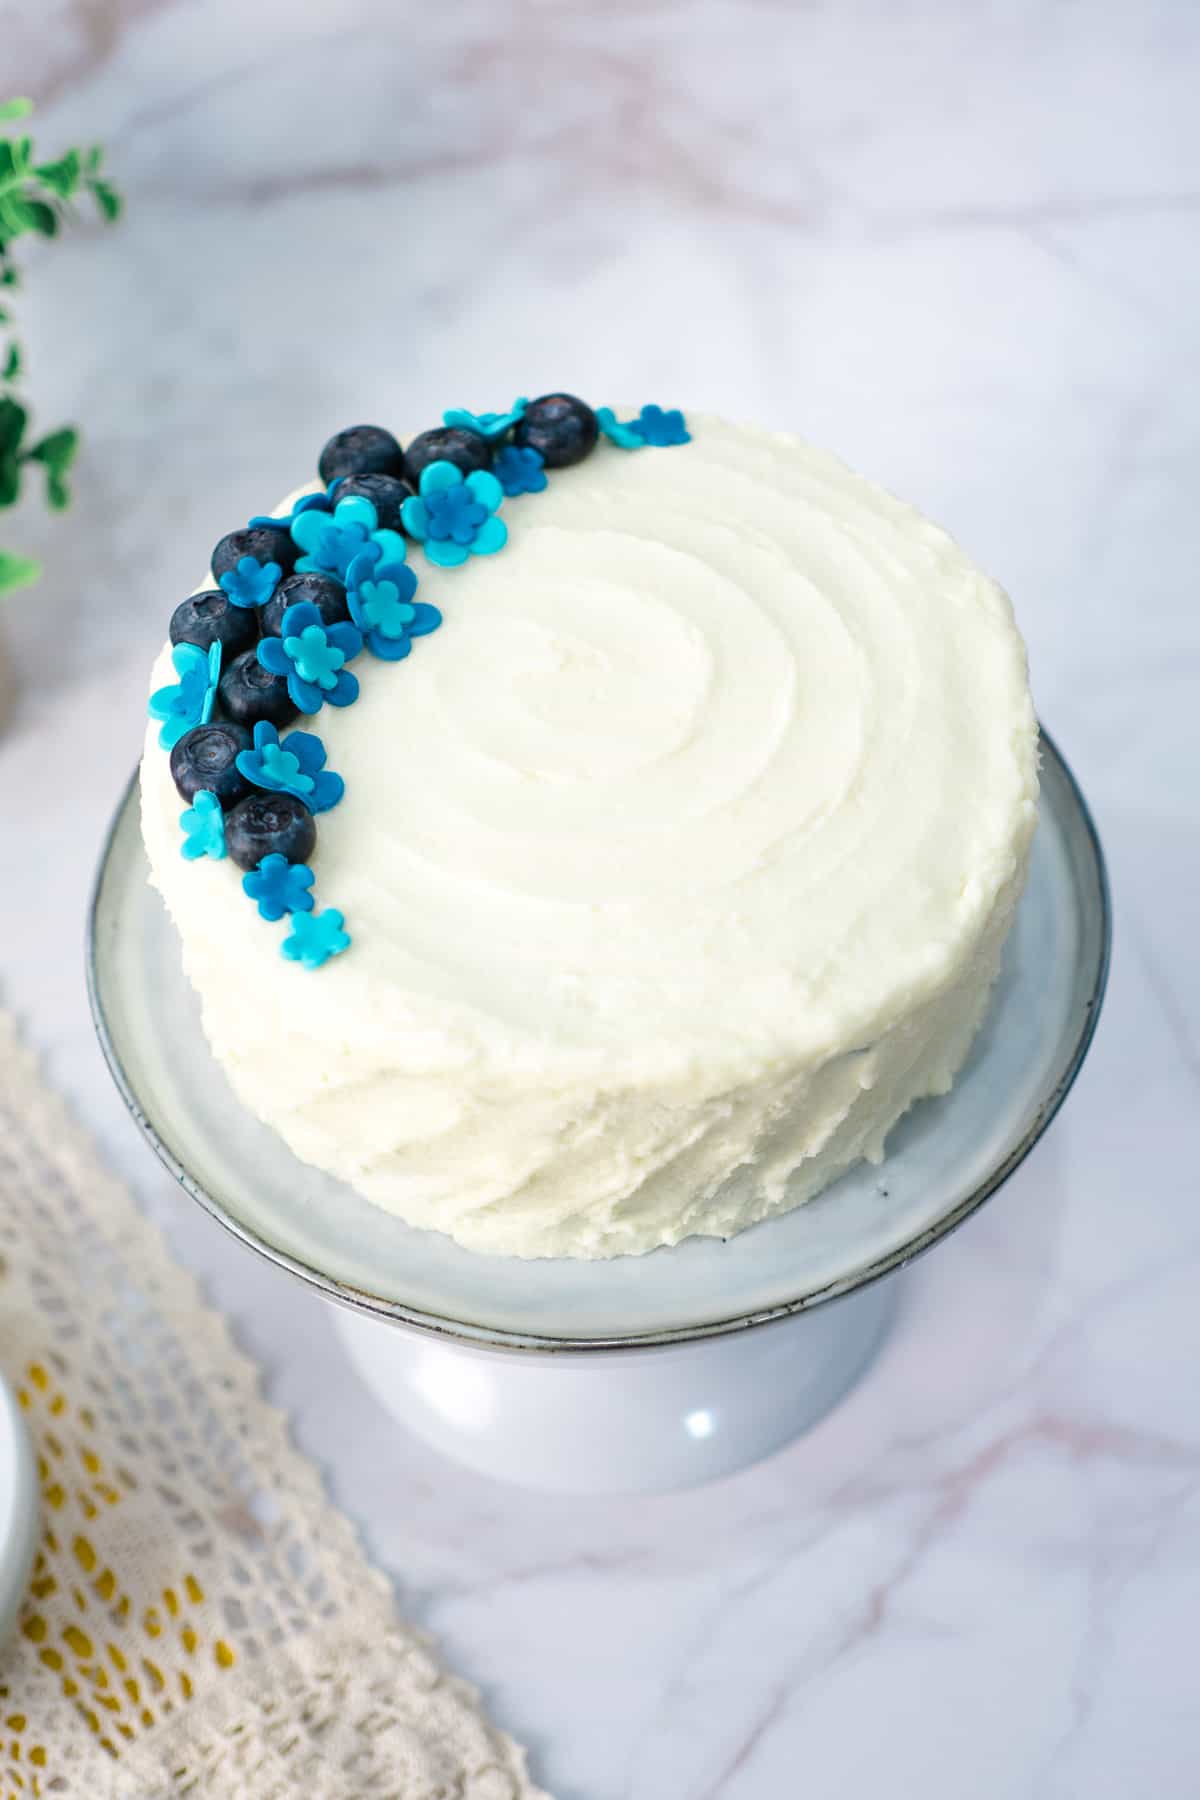 A round cake with white frosting decorated with blue fondant flowers and blueberries.